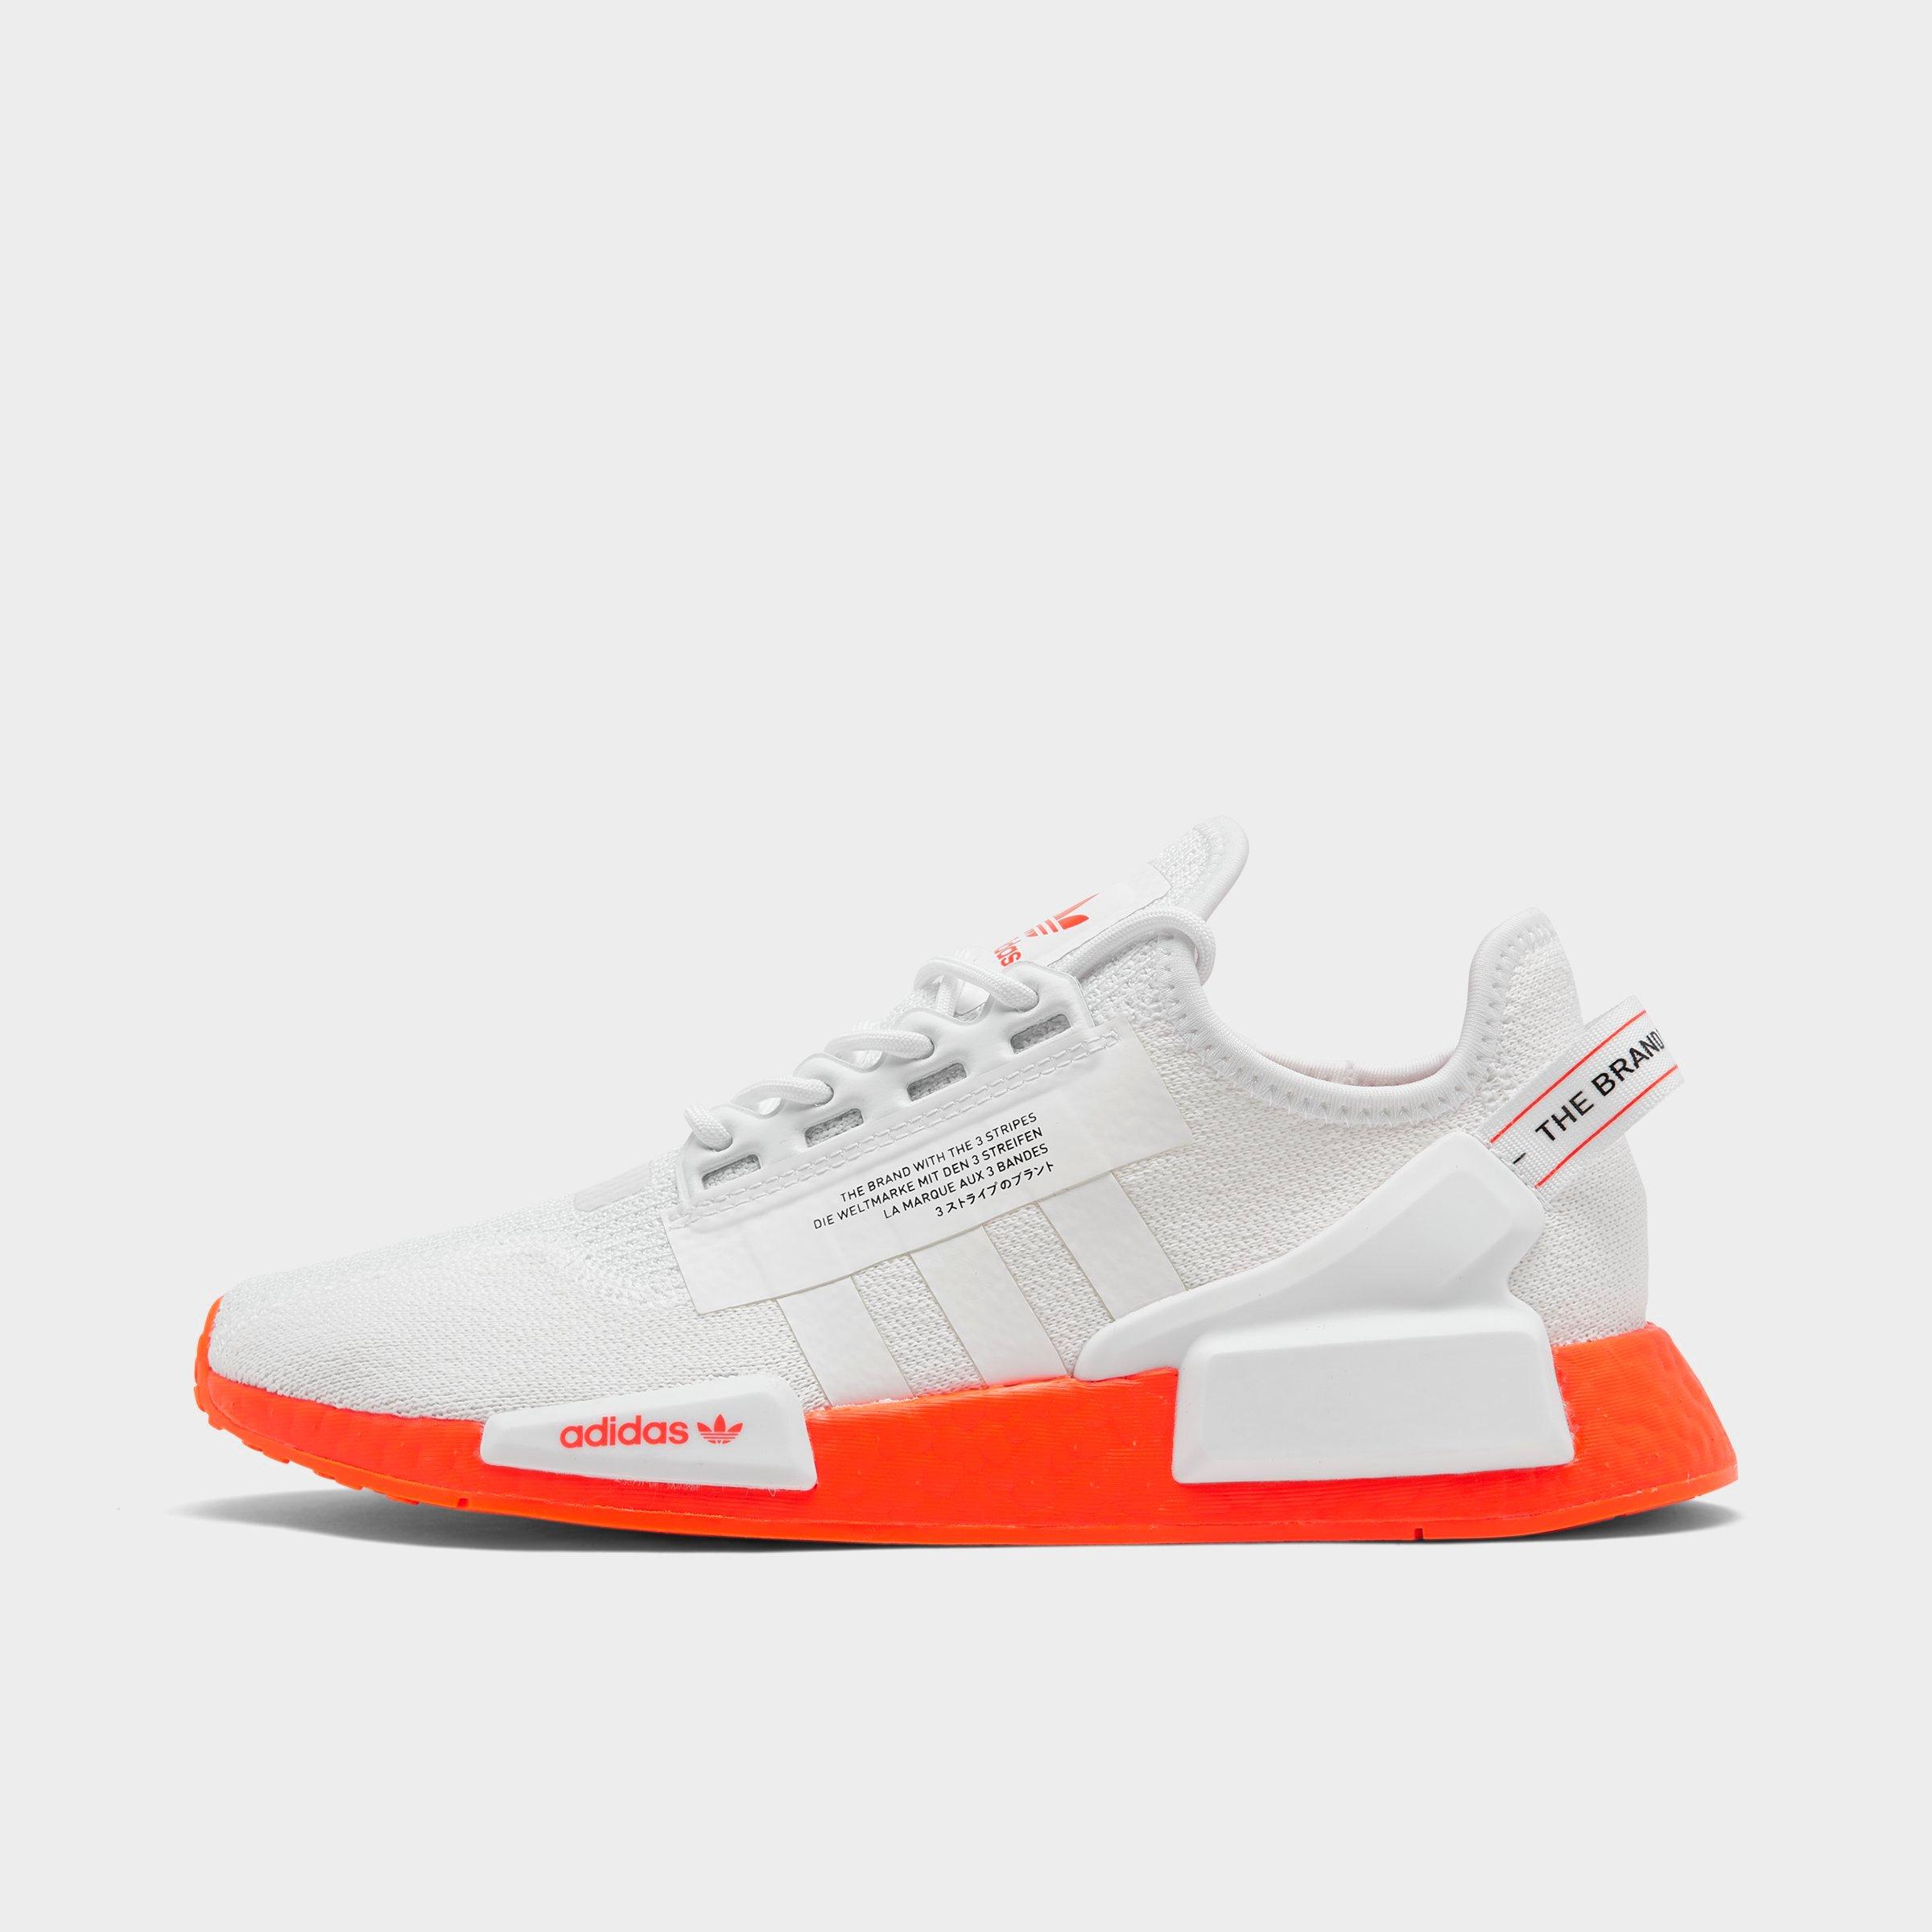 NMD R1 Boost Shoes adidas us